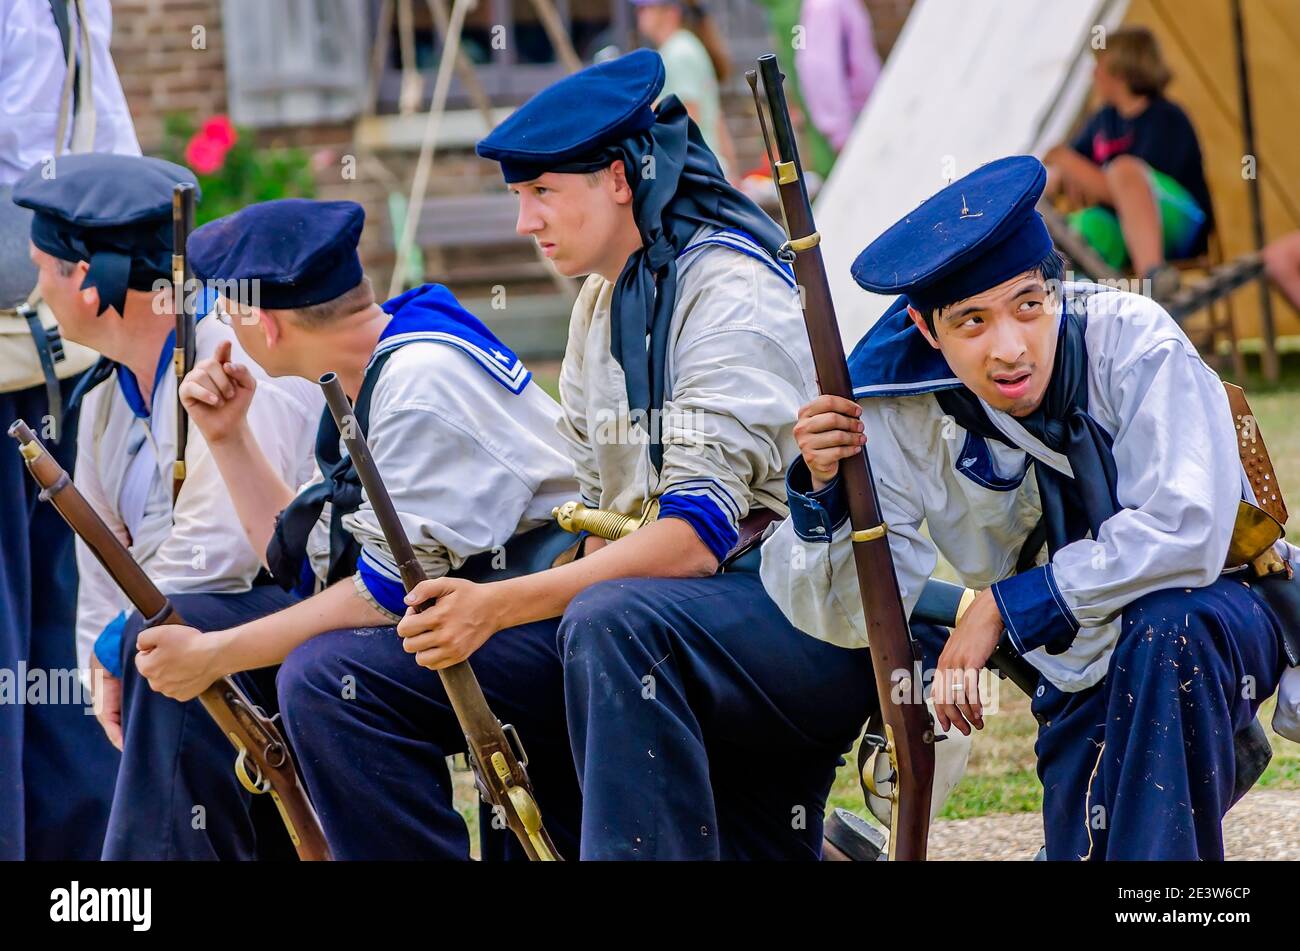 Civil War reenactors represent the Union Army at Fort Gaines during a reenactment of the 150th Battle of Mobile Bay in Dauphin Island, Alabama. Stock Photo